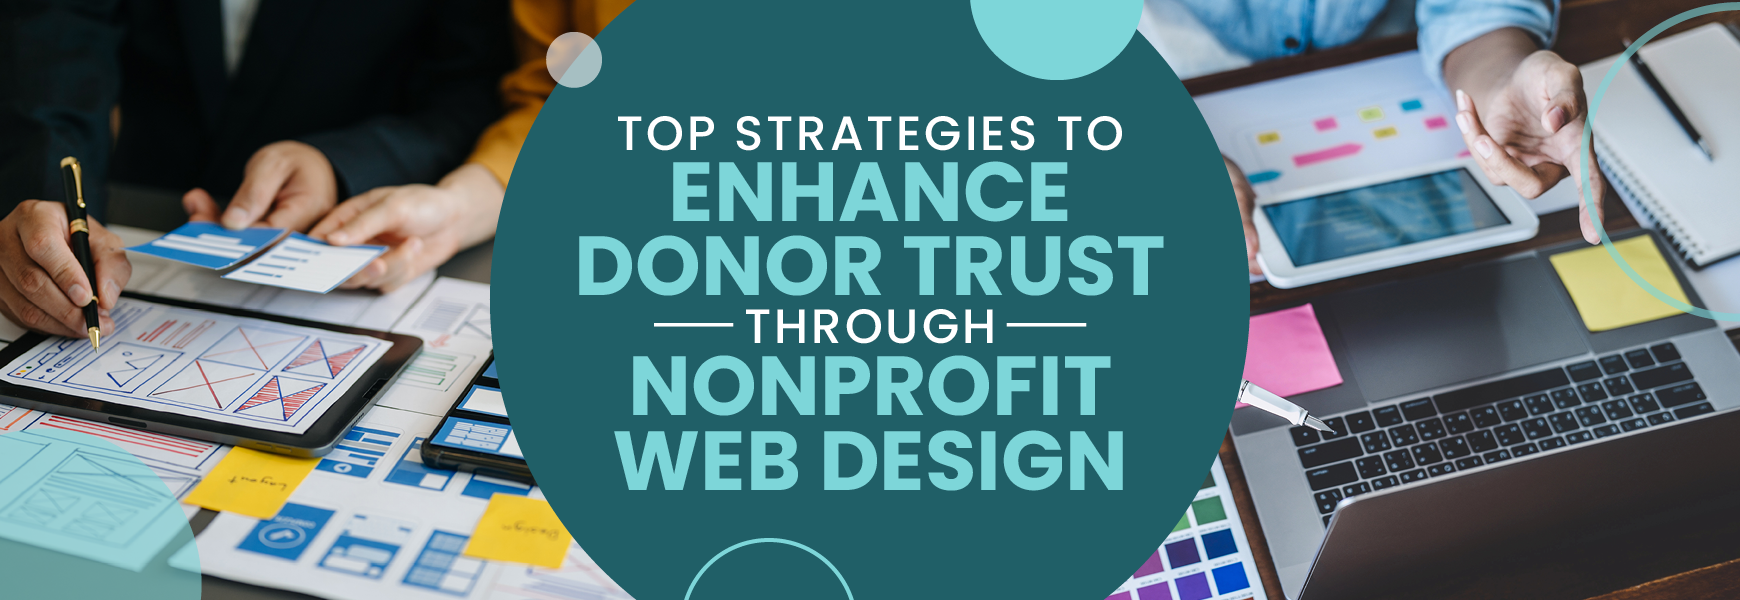 The title of the post is shown on top of an image of nonprofit professionals planning their website design to enhance donor trust.